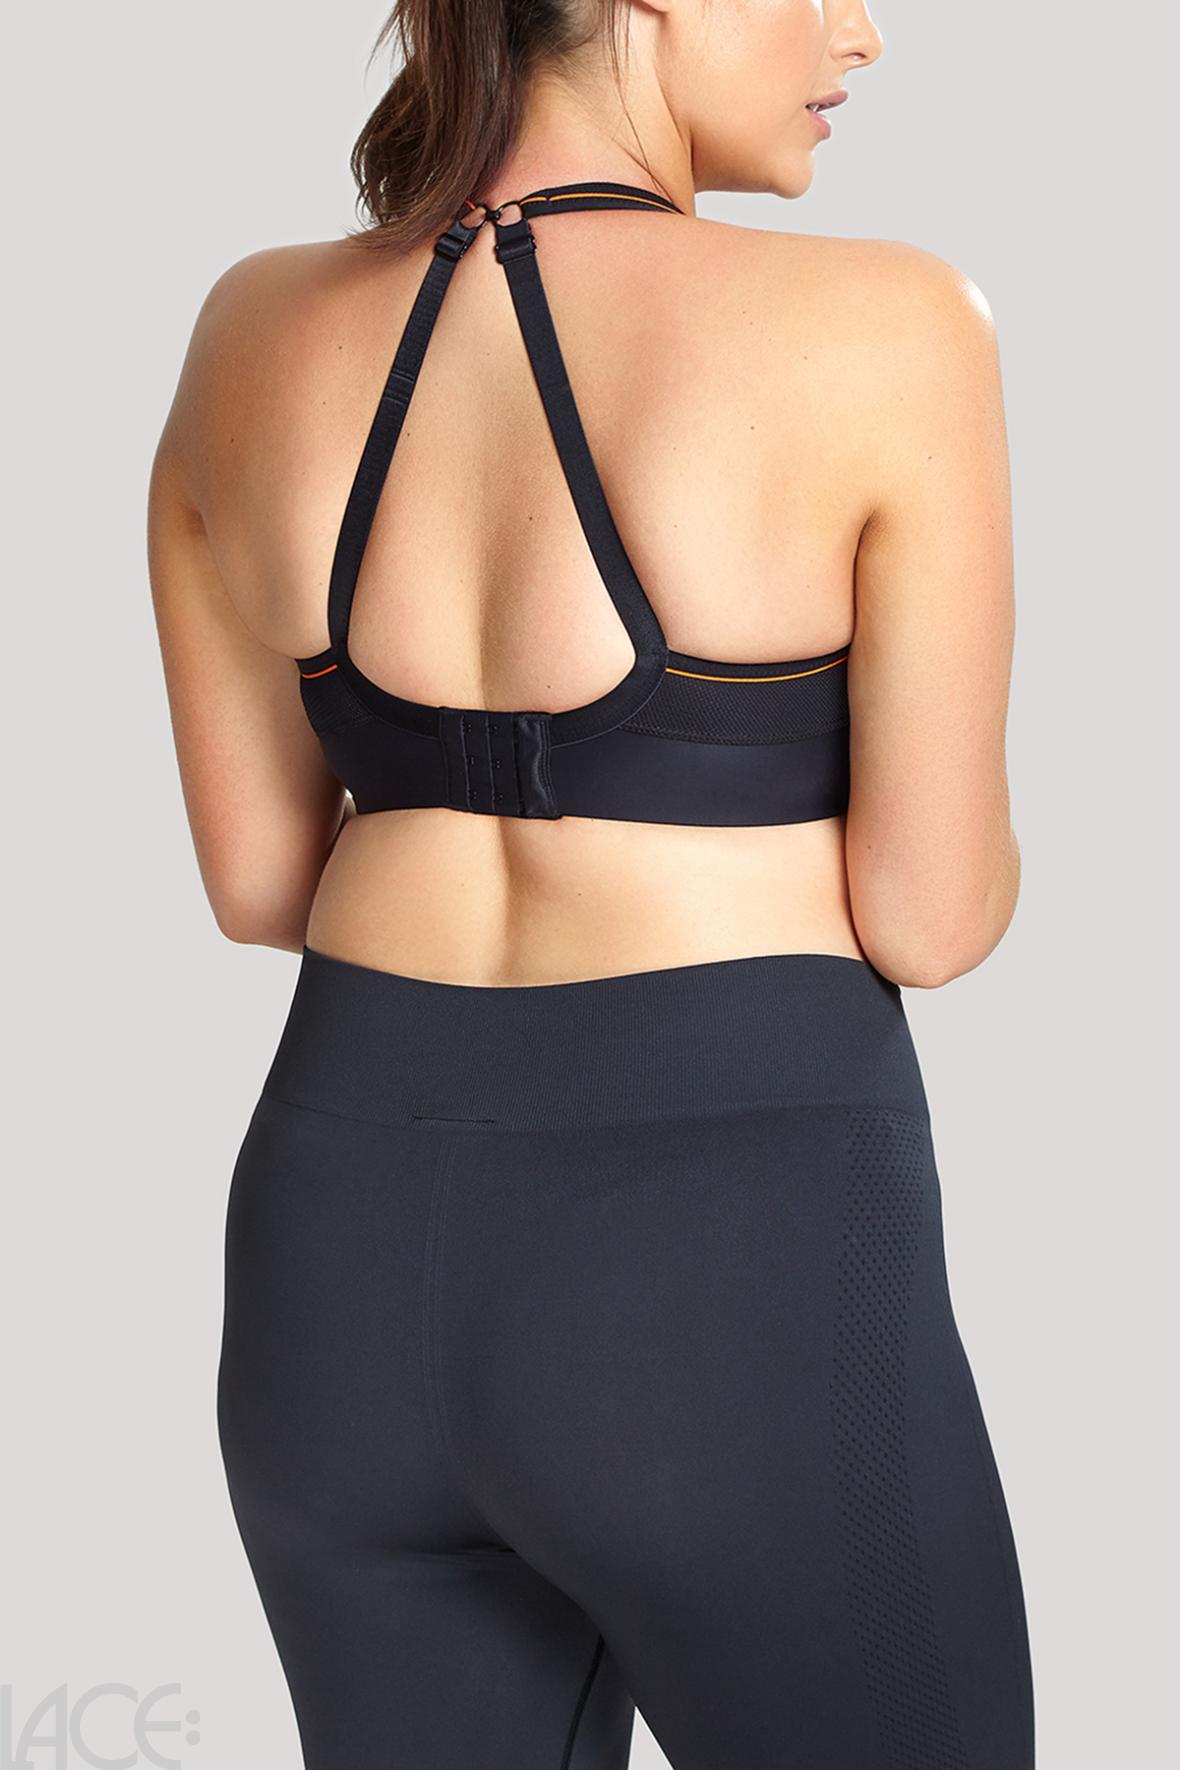 Sculptresse Sports Bra: What you need to know